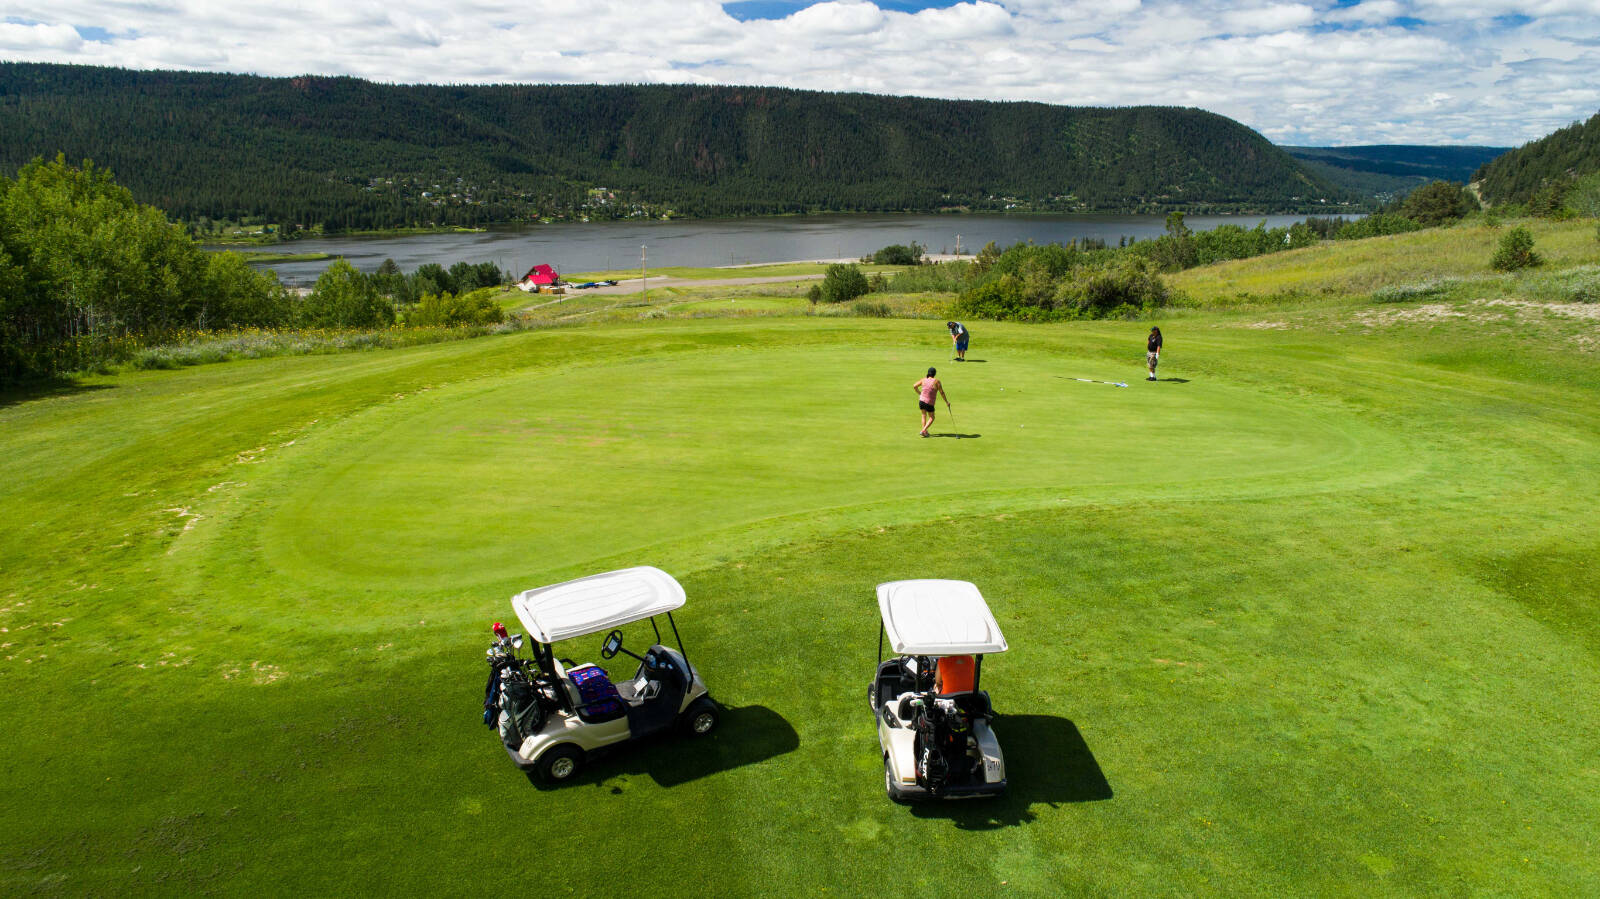 Enjoy a round of golf at Coyote Rock, on the Texelcemc traditional territory, offering stunning views of Williams Lake and the San Jose River Valley.